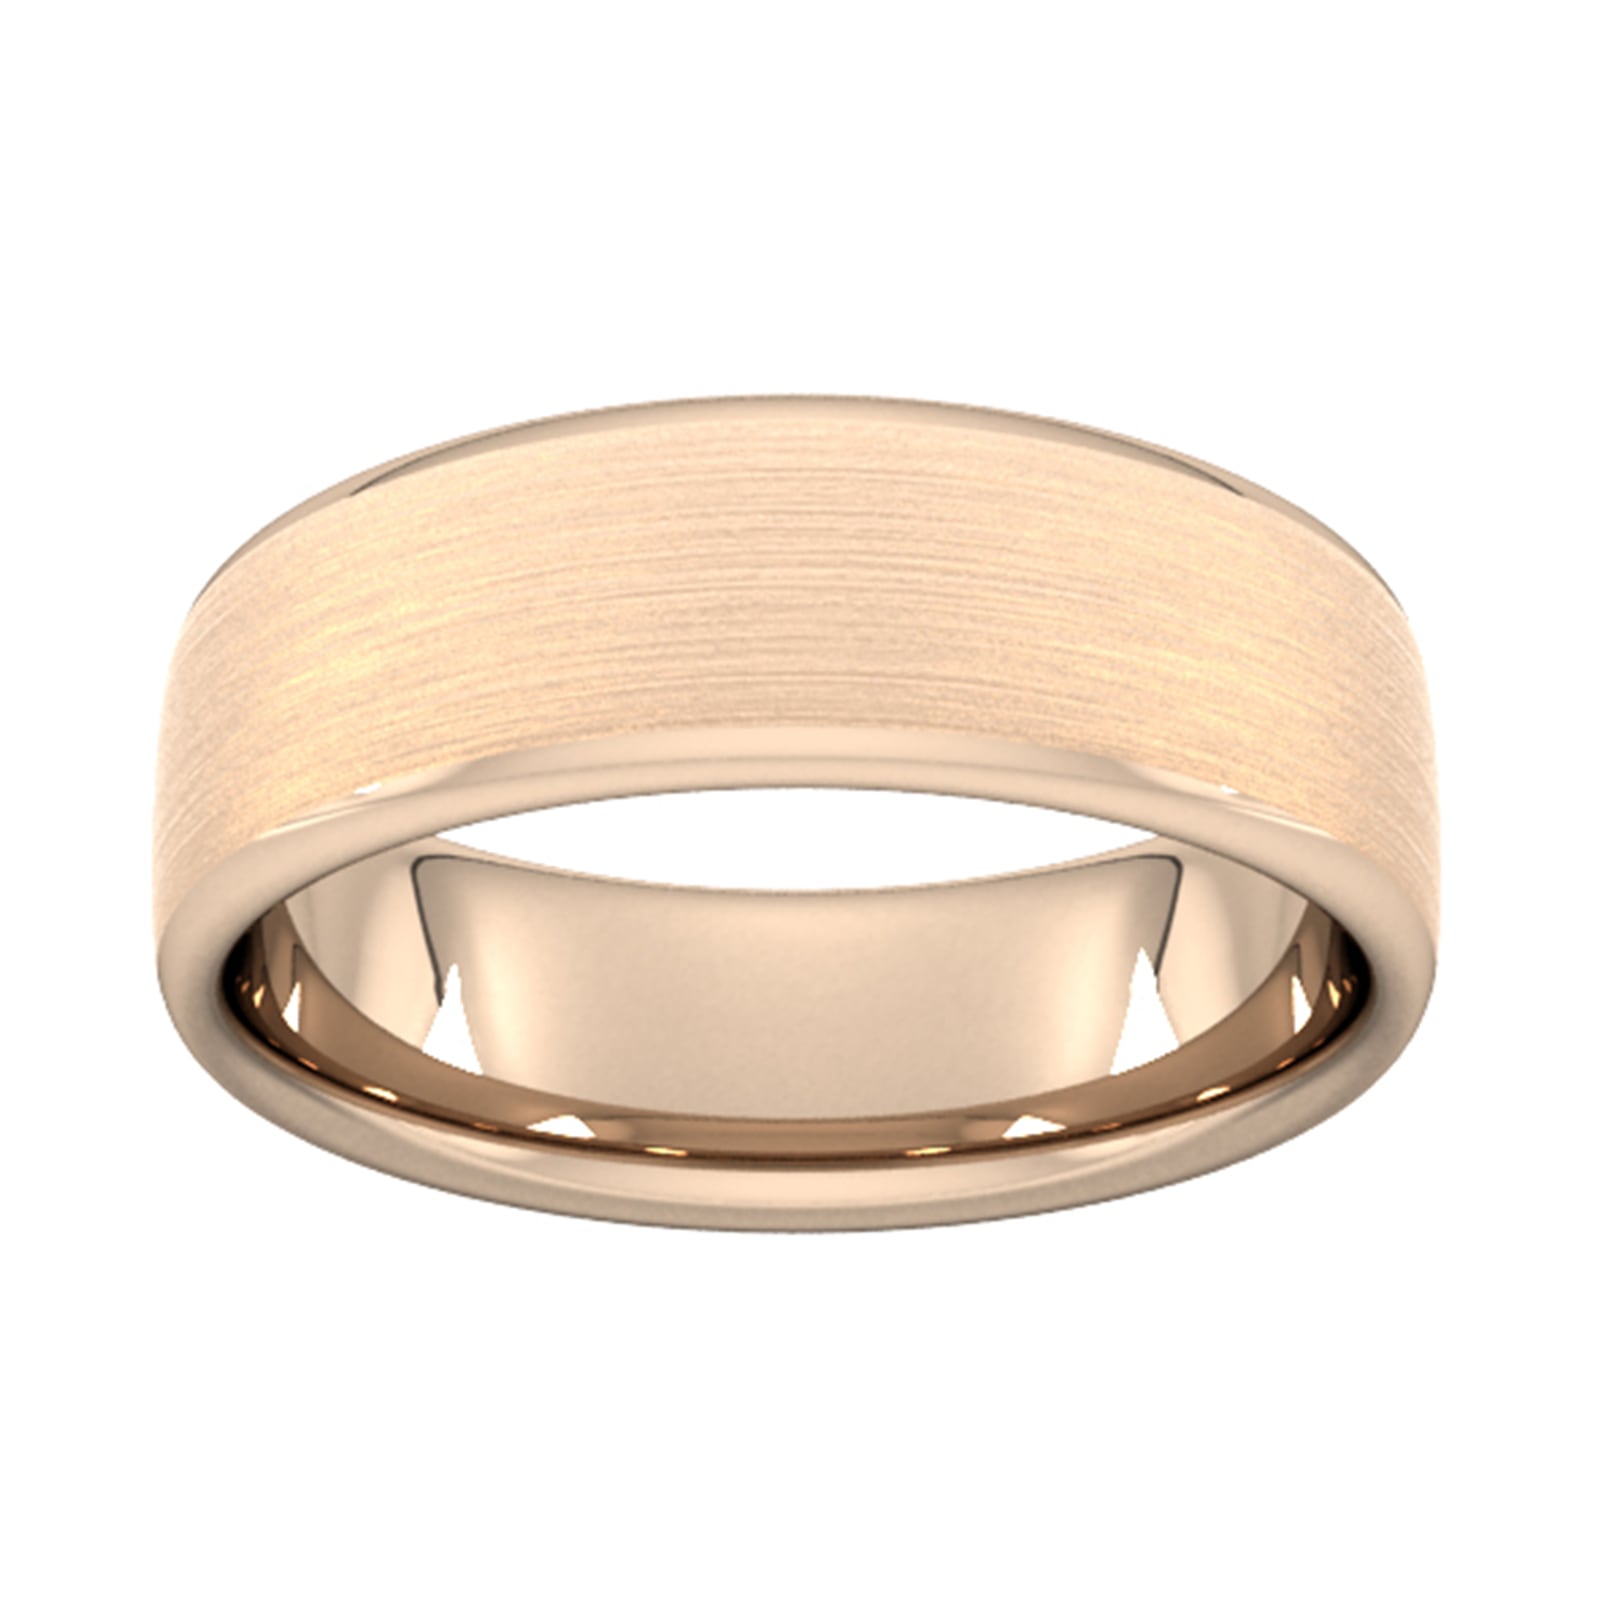 7mm Flat Court Heavy Matt Finished Wedding Ring In 18 Carat Rose Gold - Ring Size W